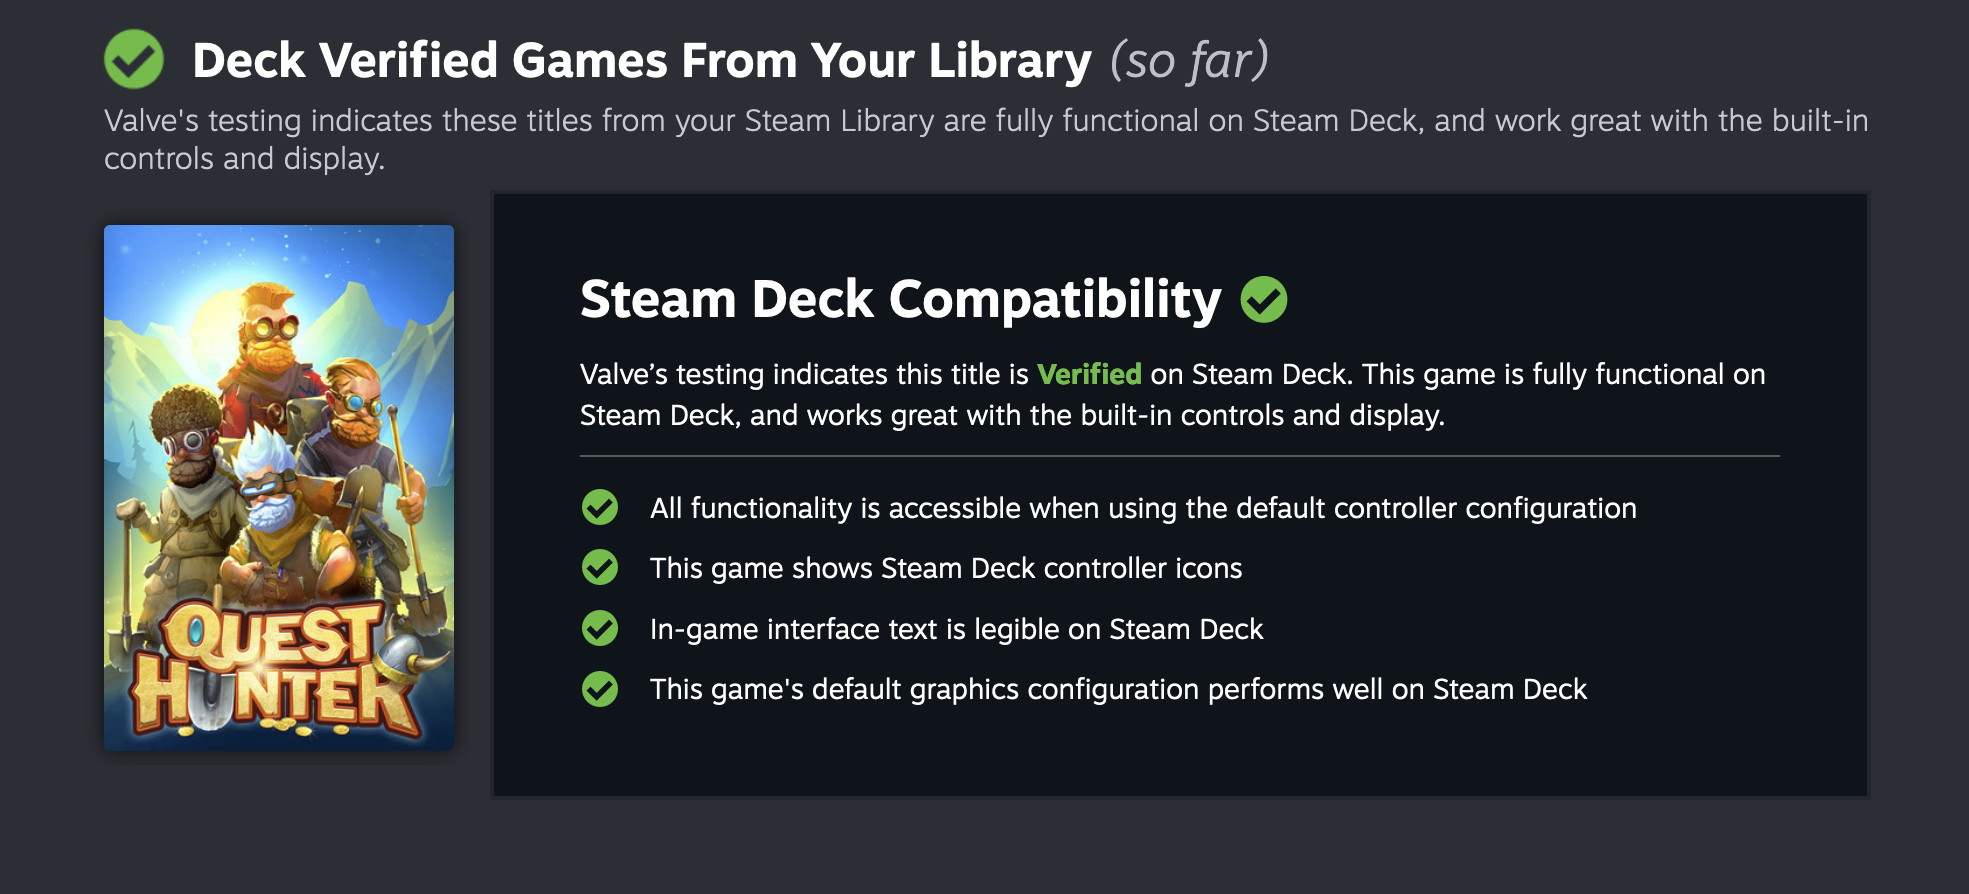 The Last of Us Part 1 Steam Deck Verification Not Being Prioritized